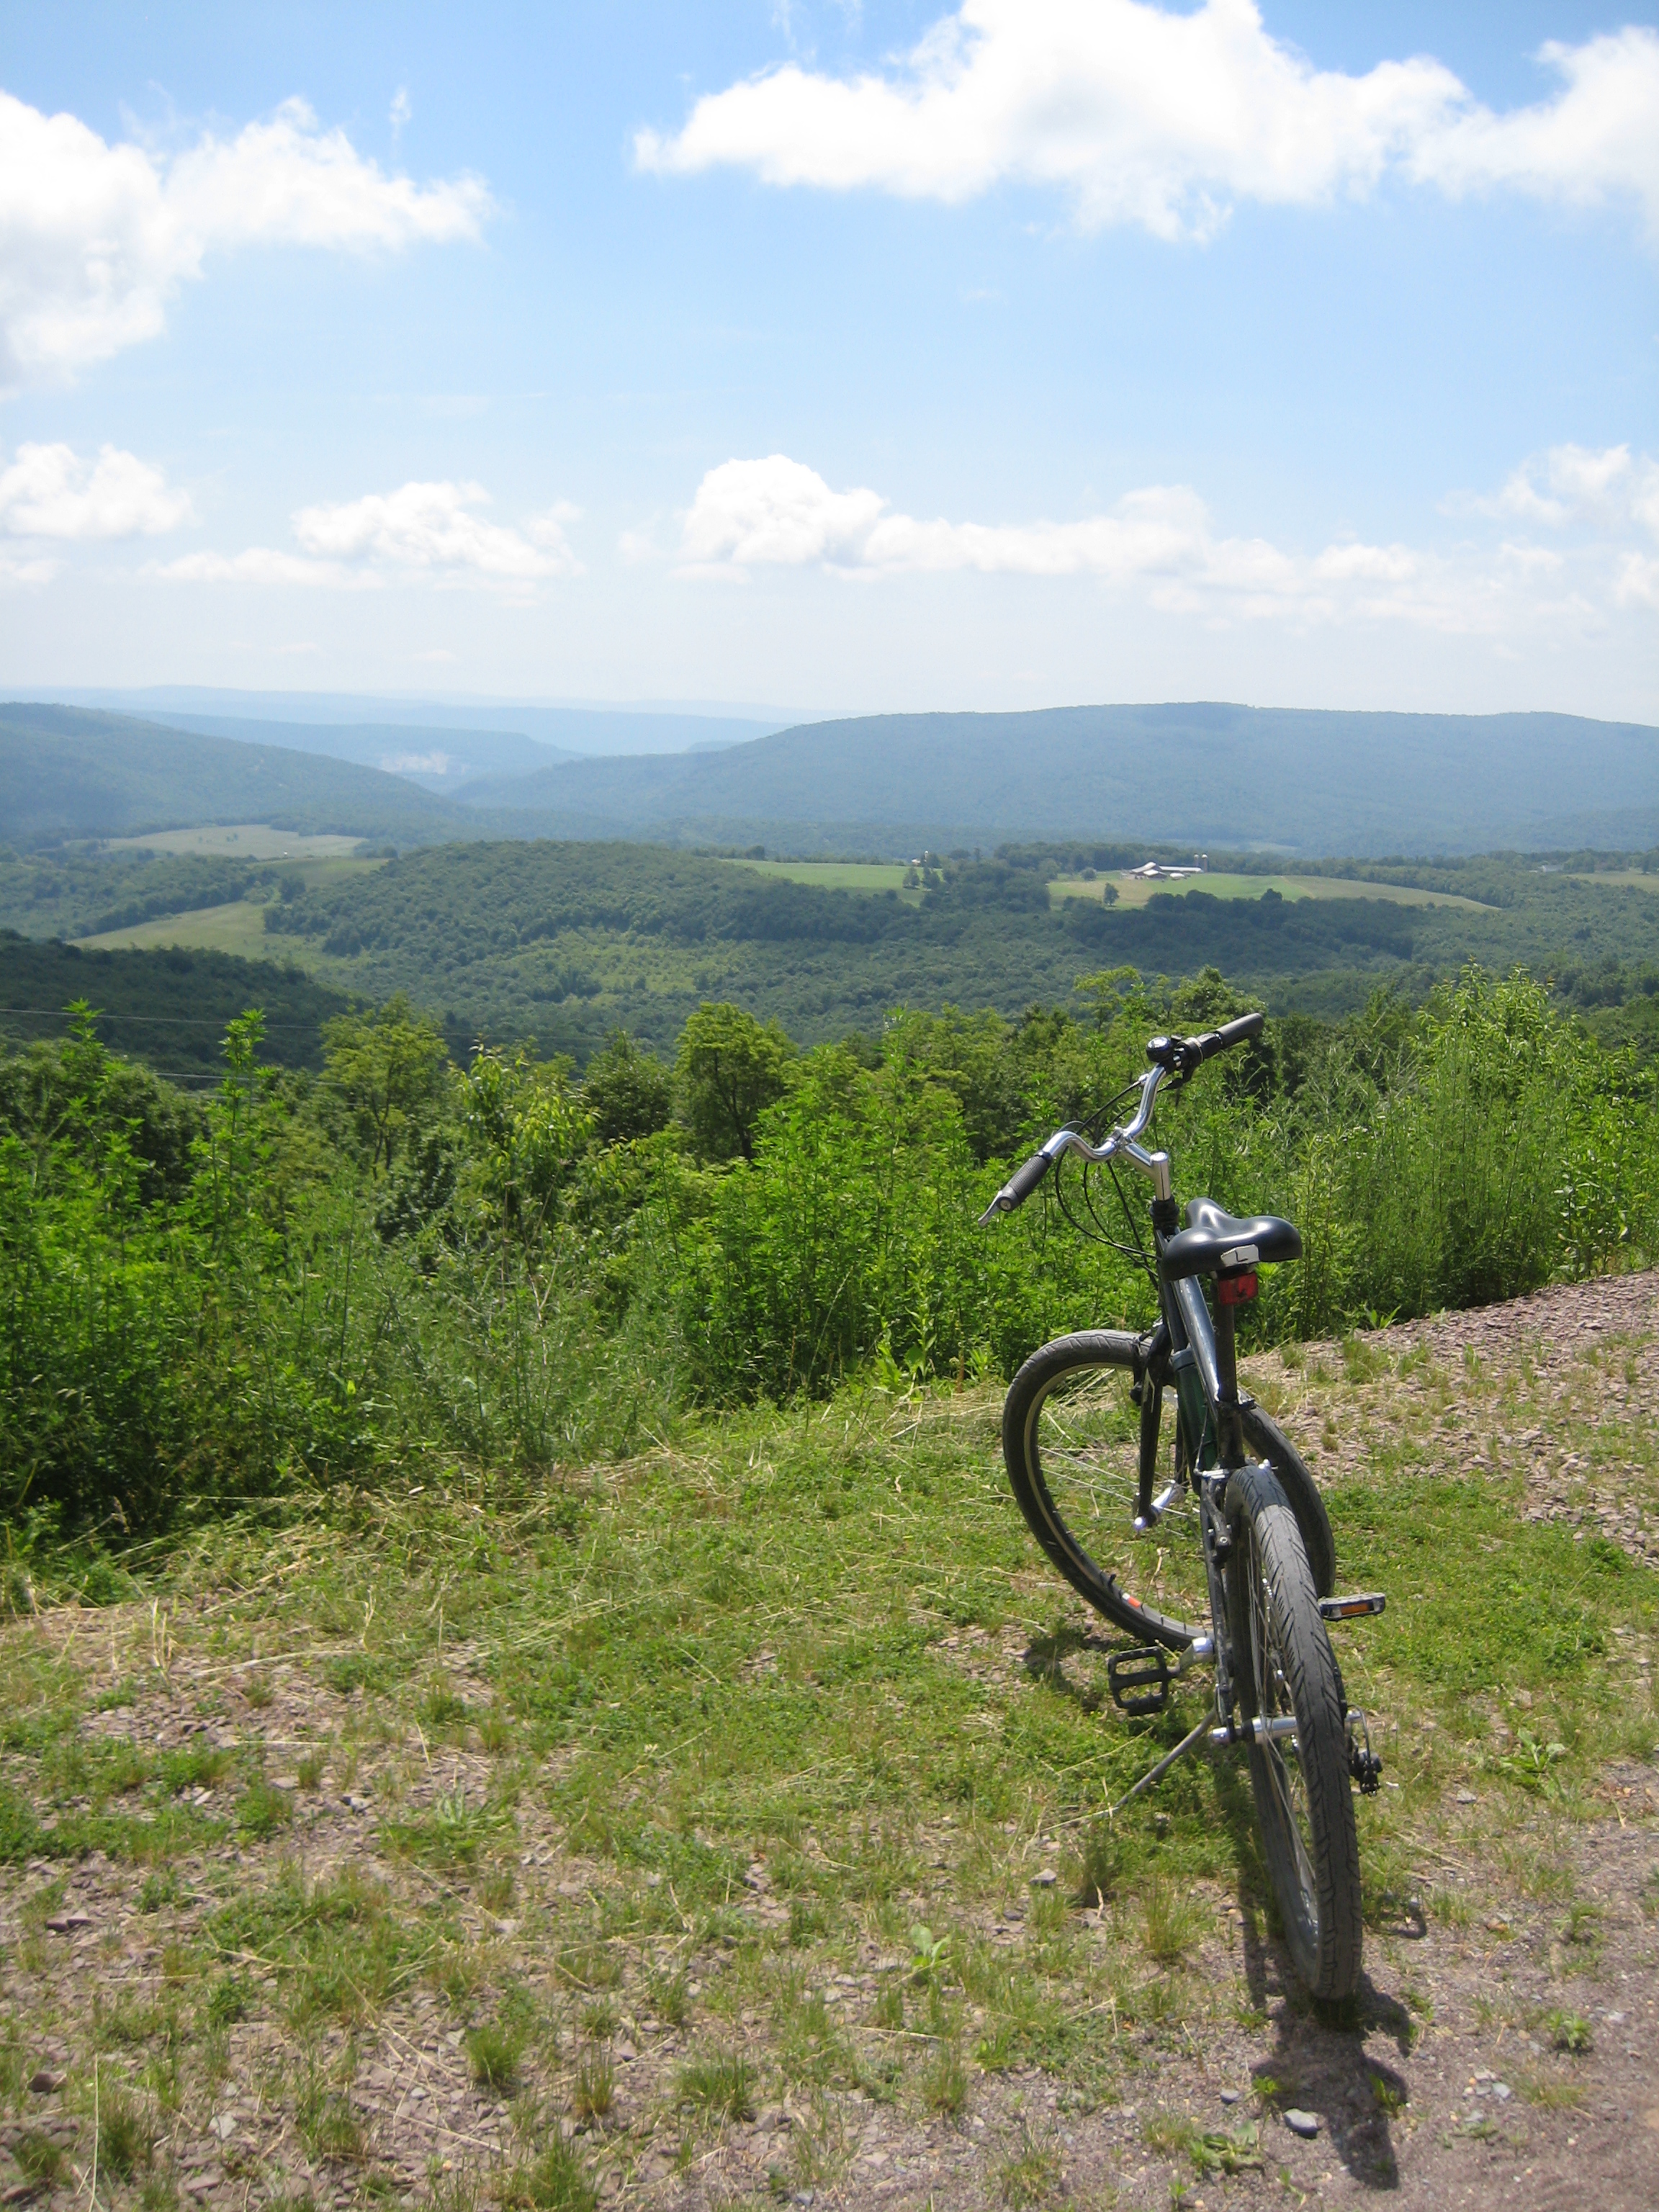 A bicycle sits on a bright summer day overlooking the rolling mountains in the distance.